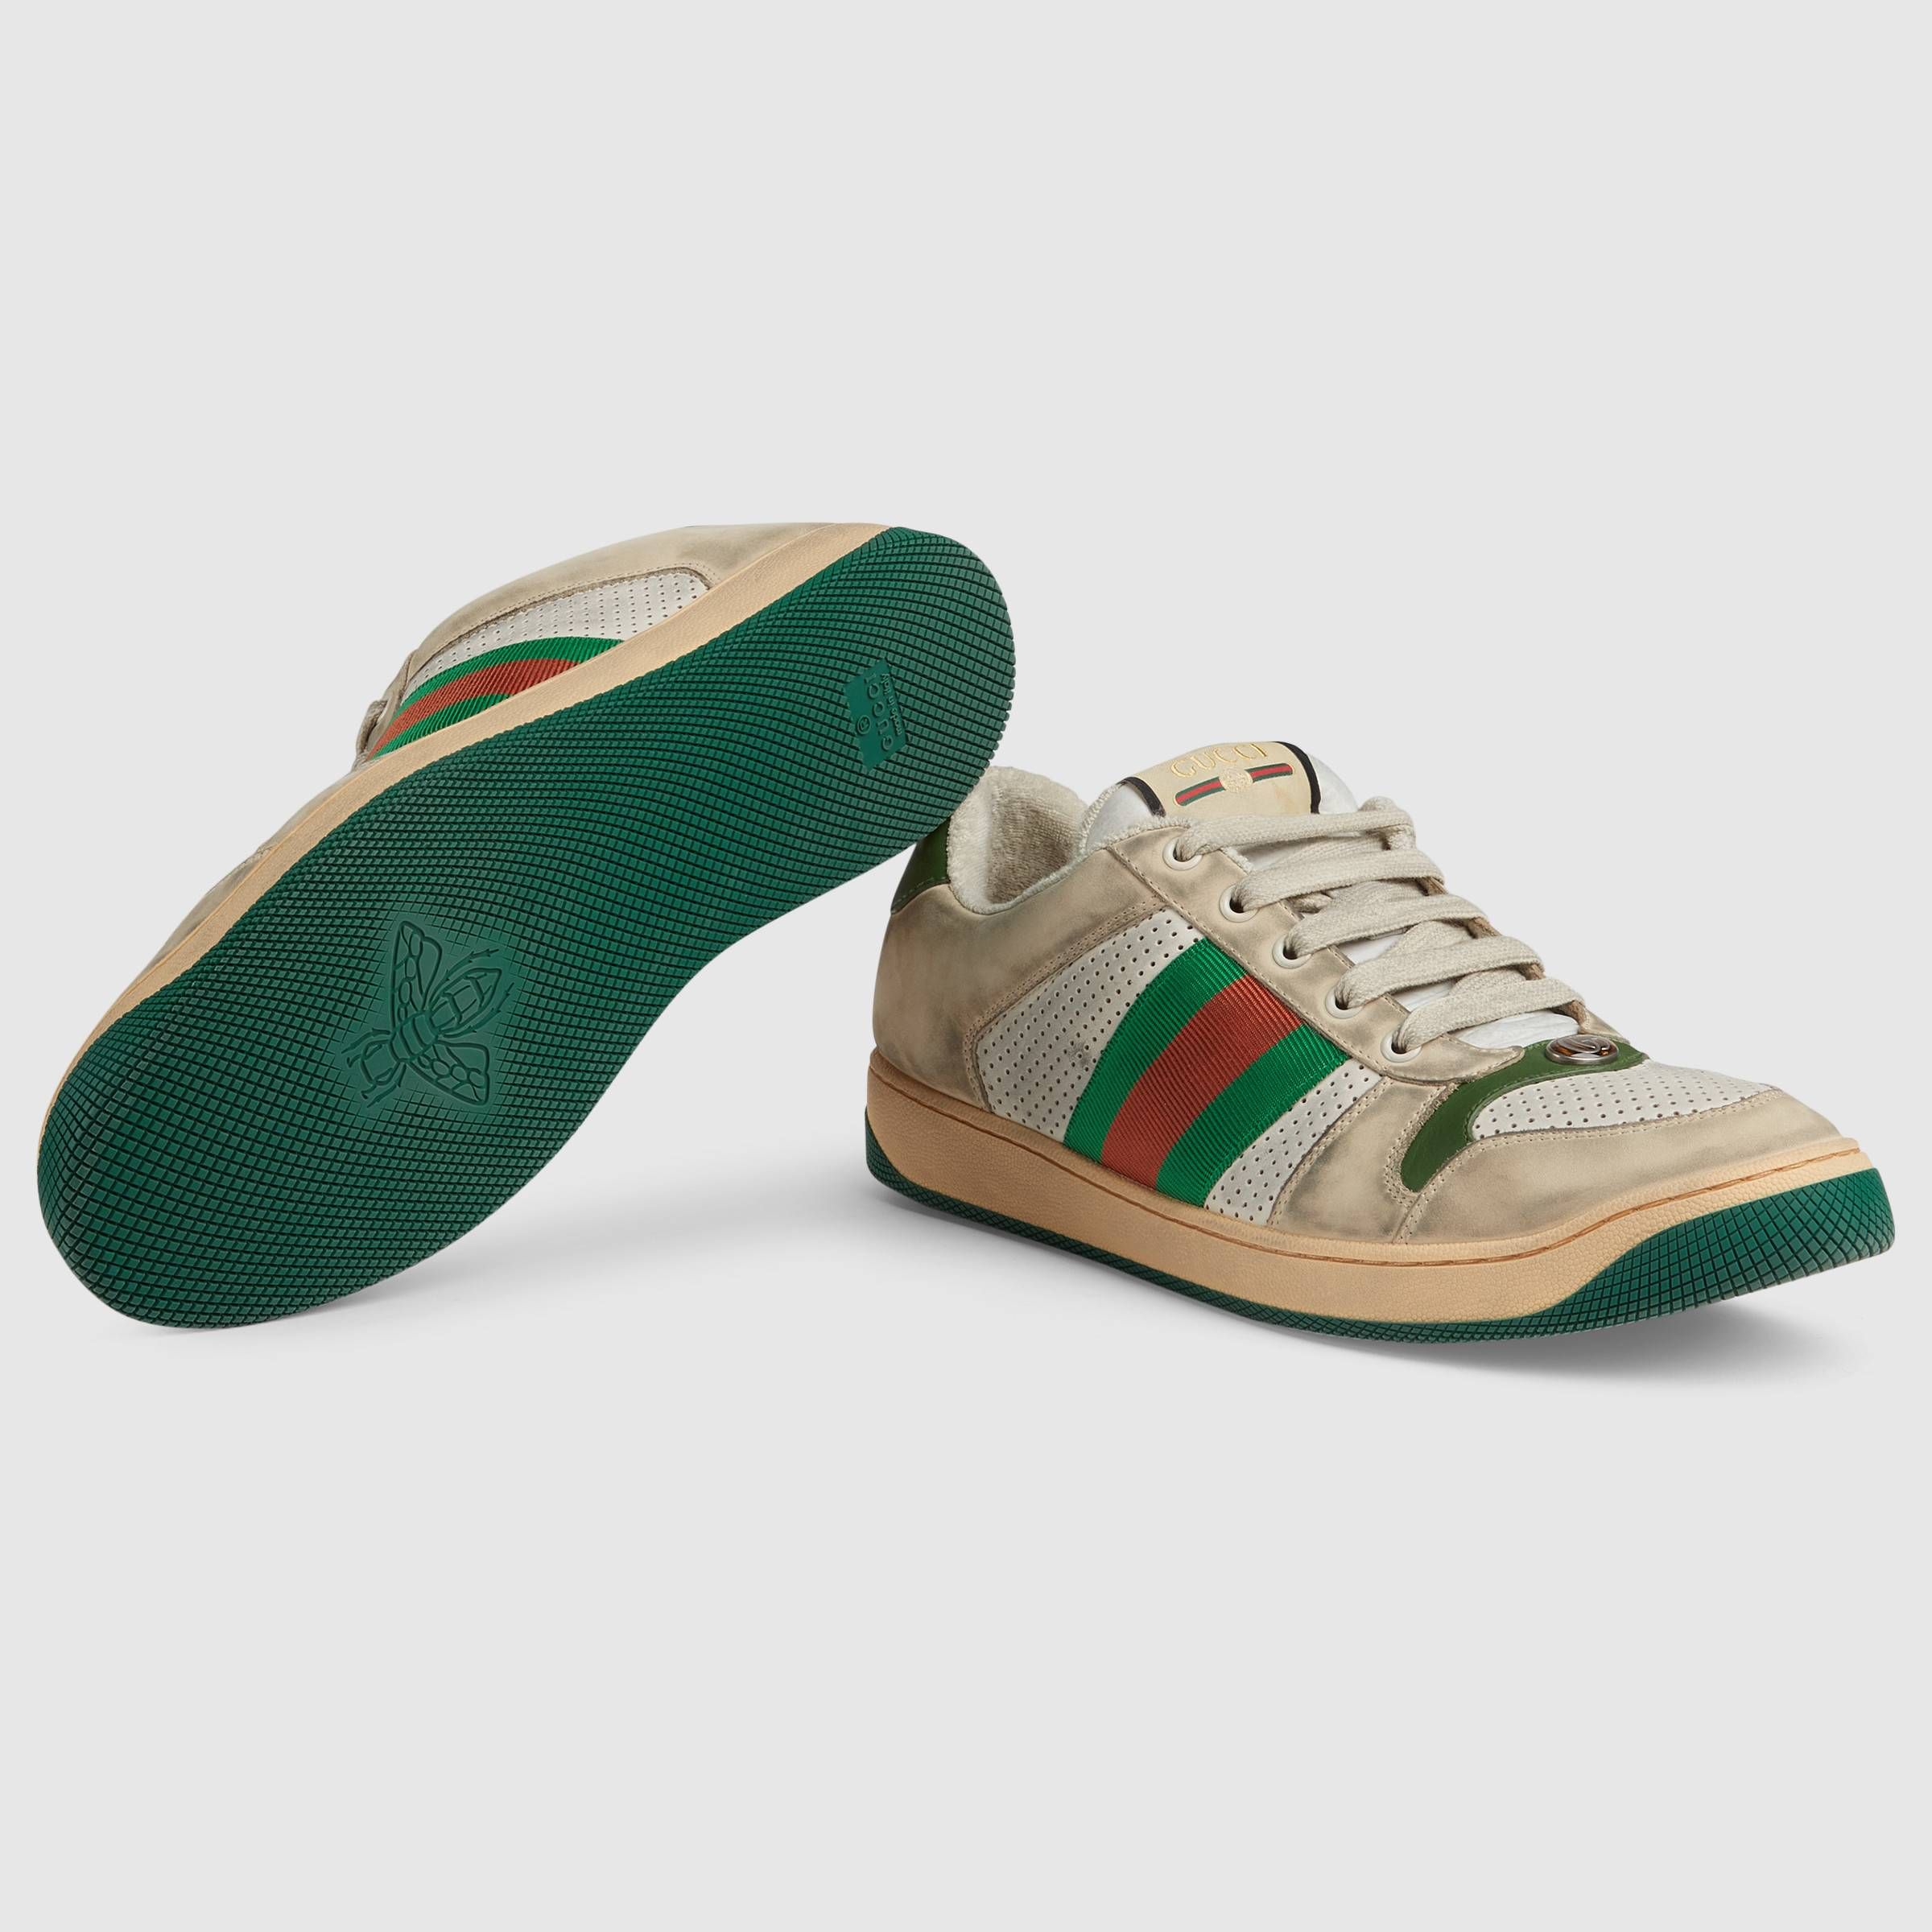 gucci shoes price dollars